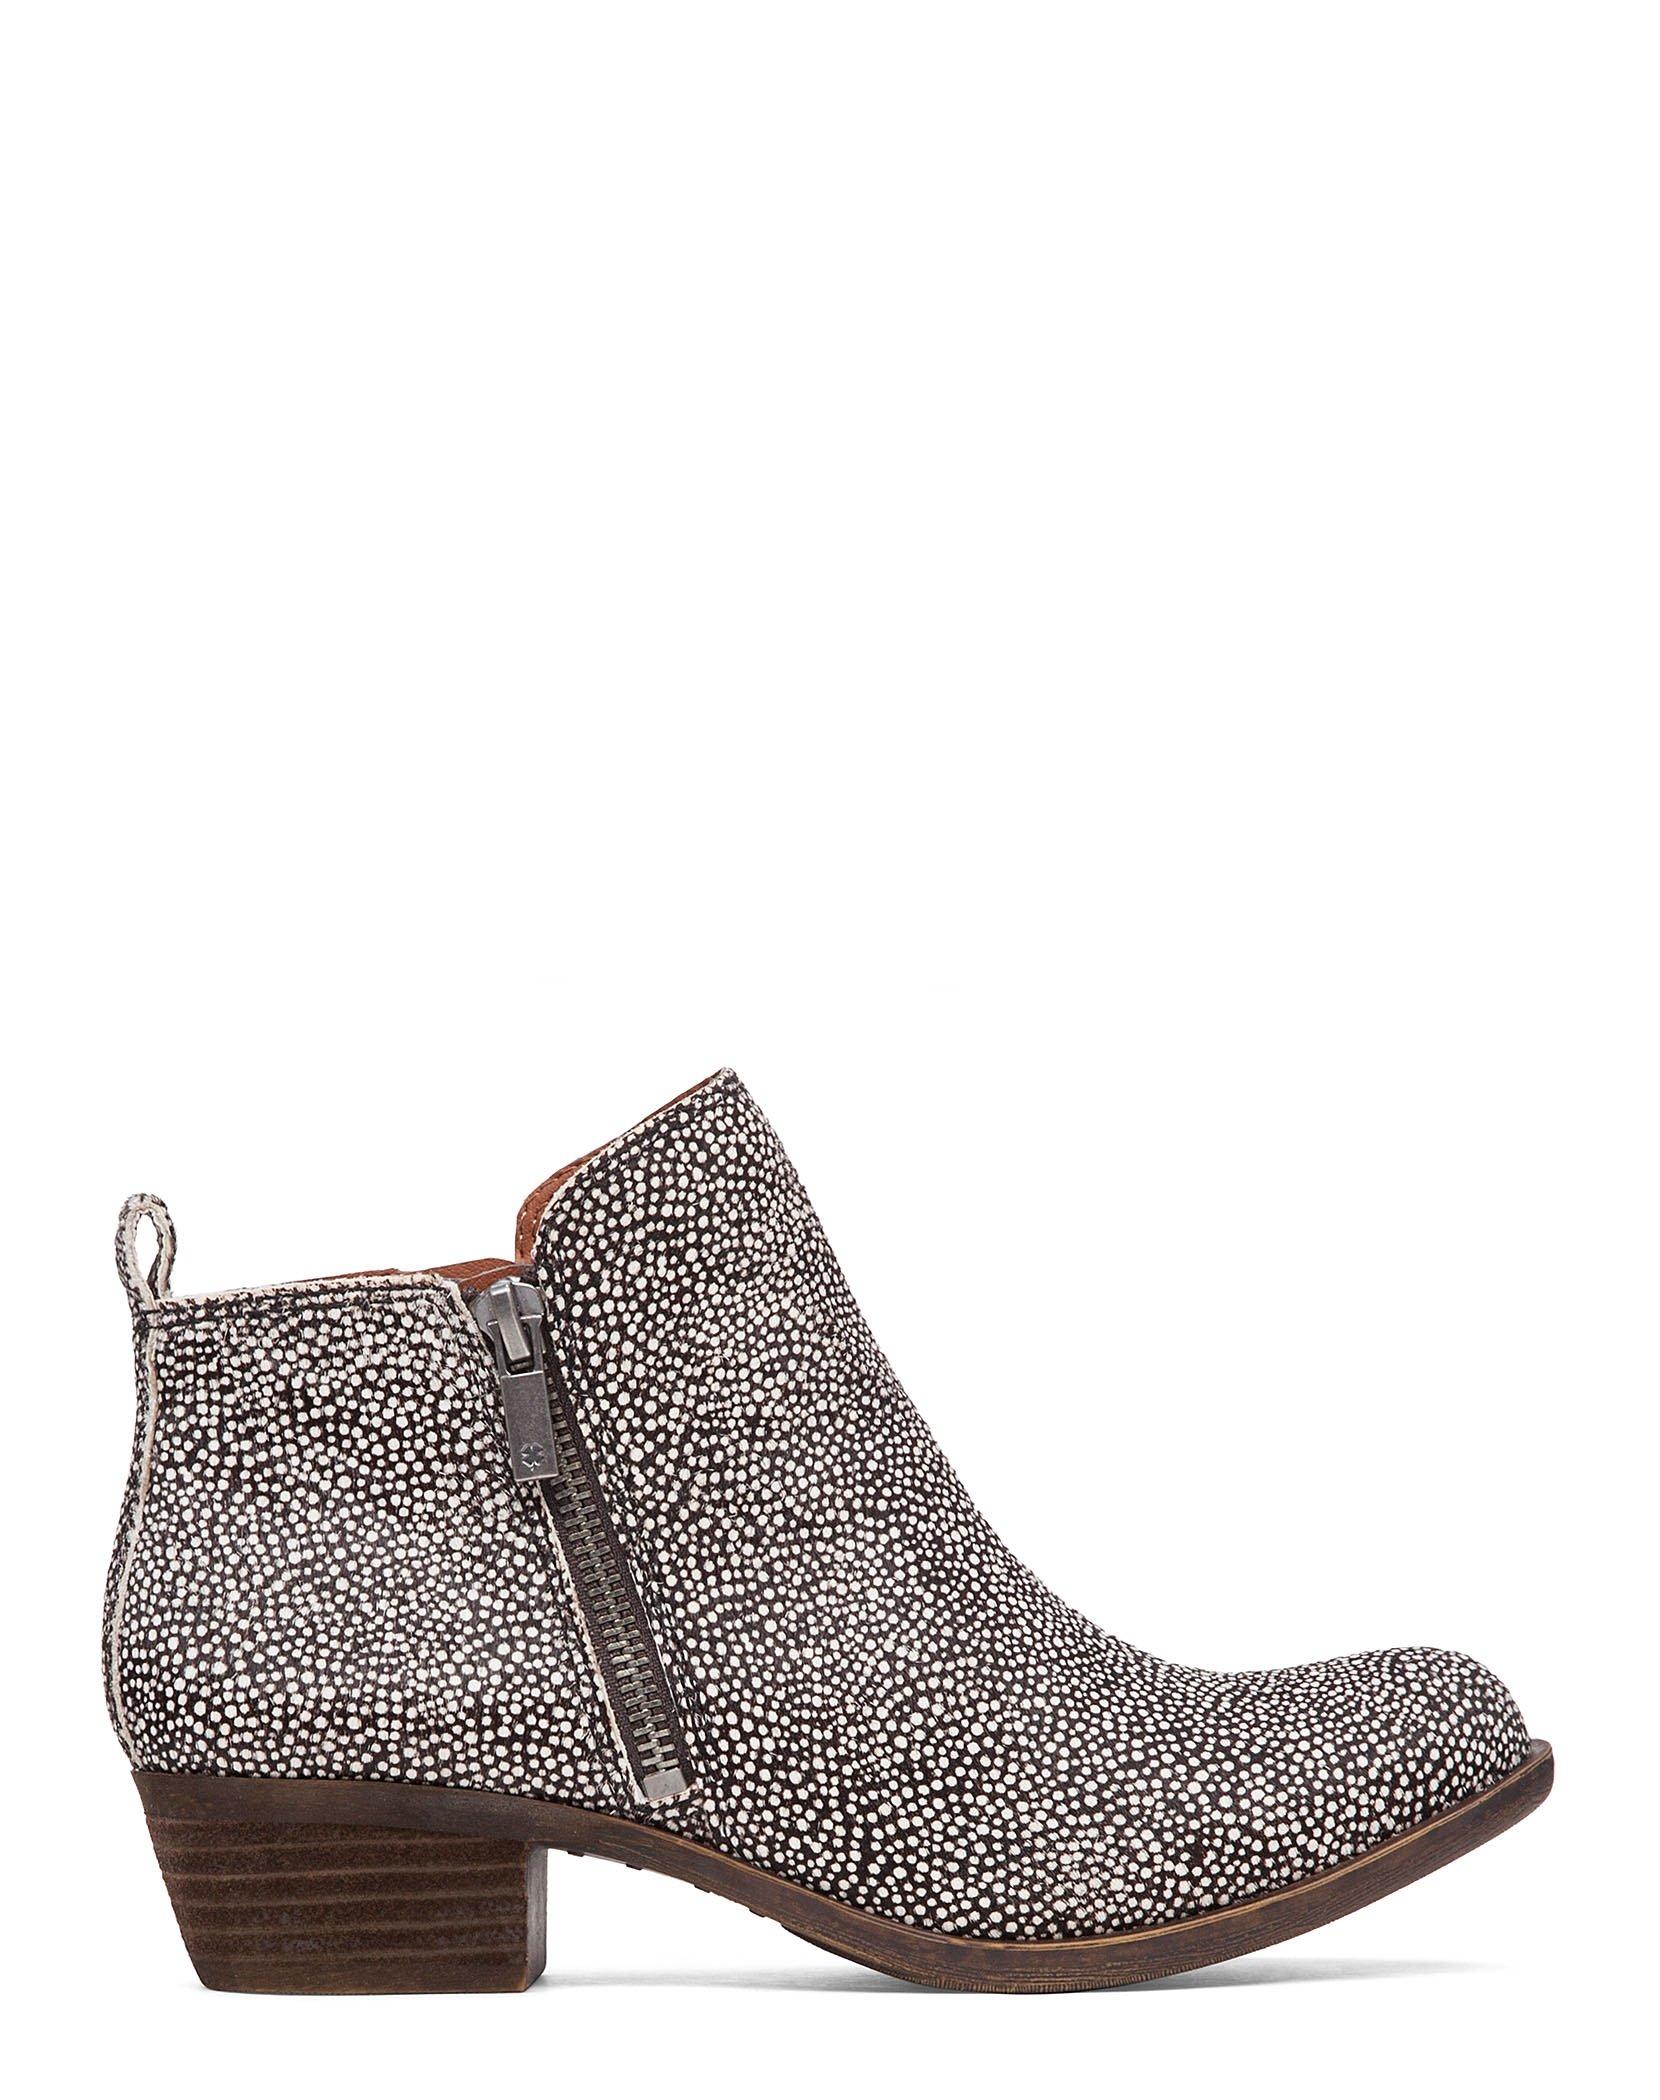 lucky brand gray suede booties